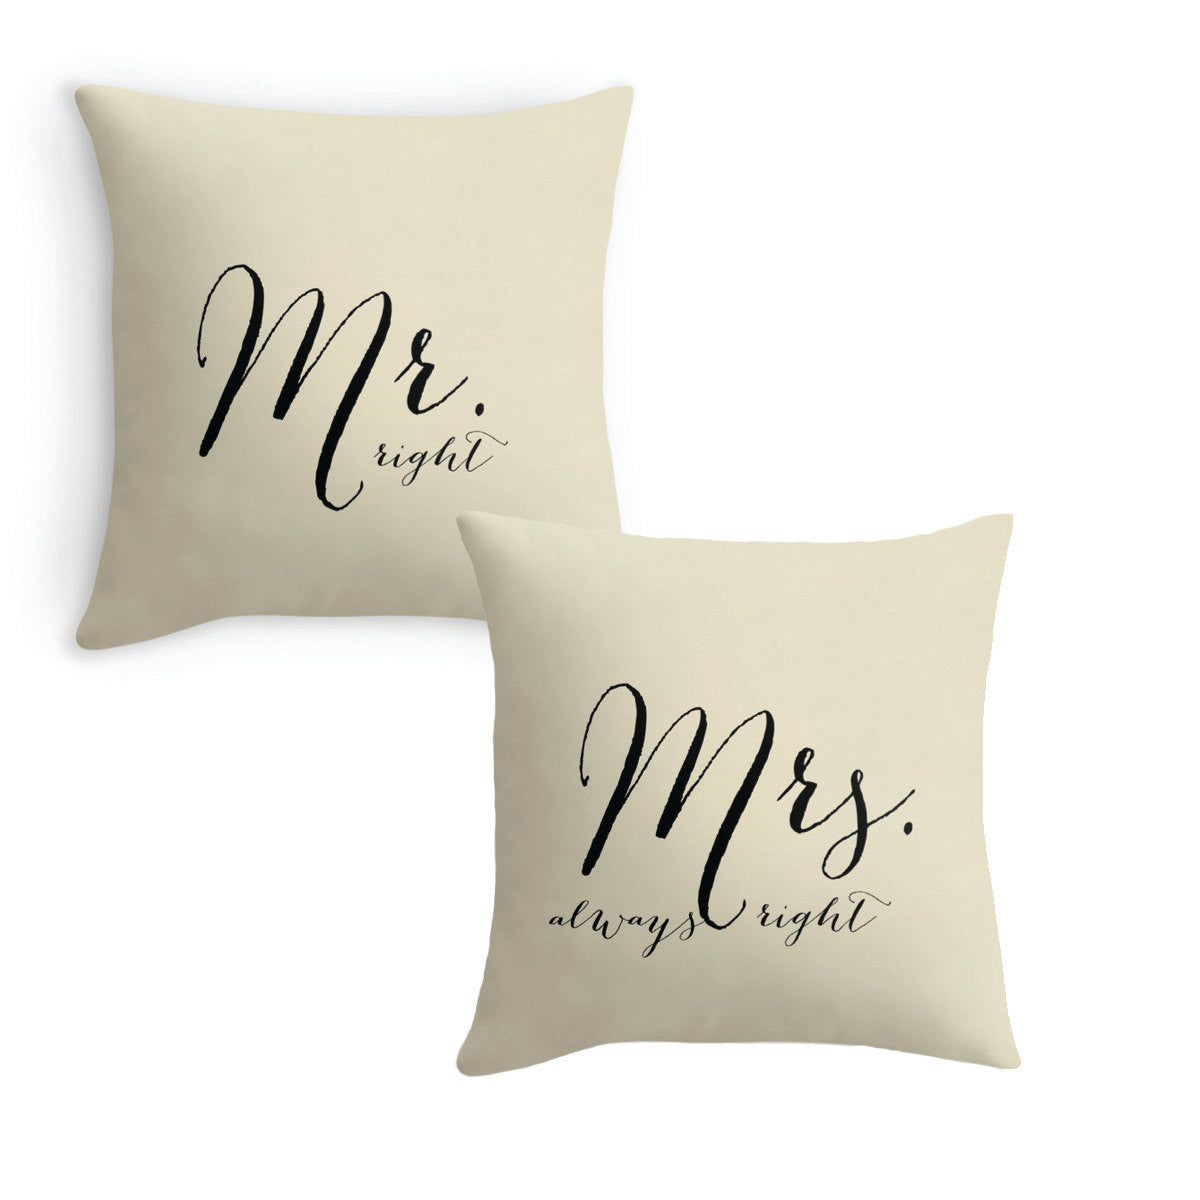 Mr. Right and Mrs. Always Right, Set of 2 Pillow Covers